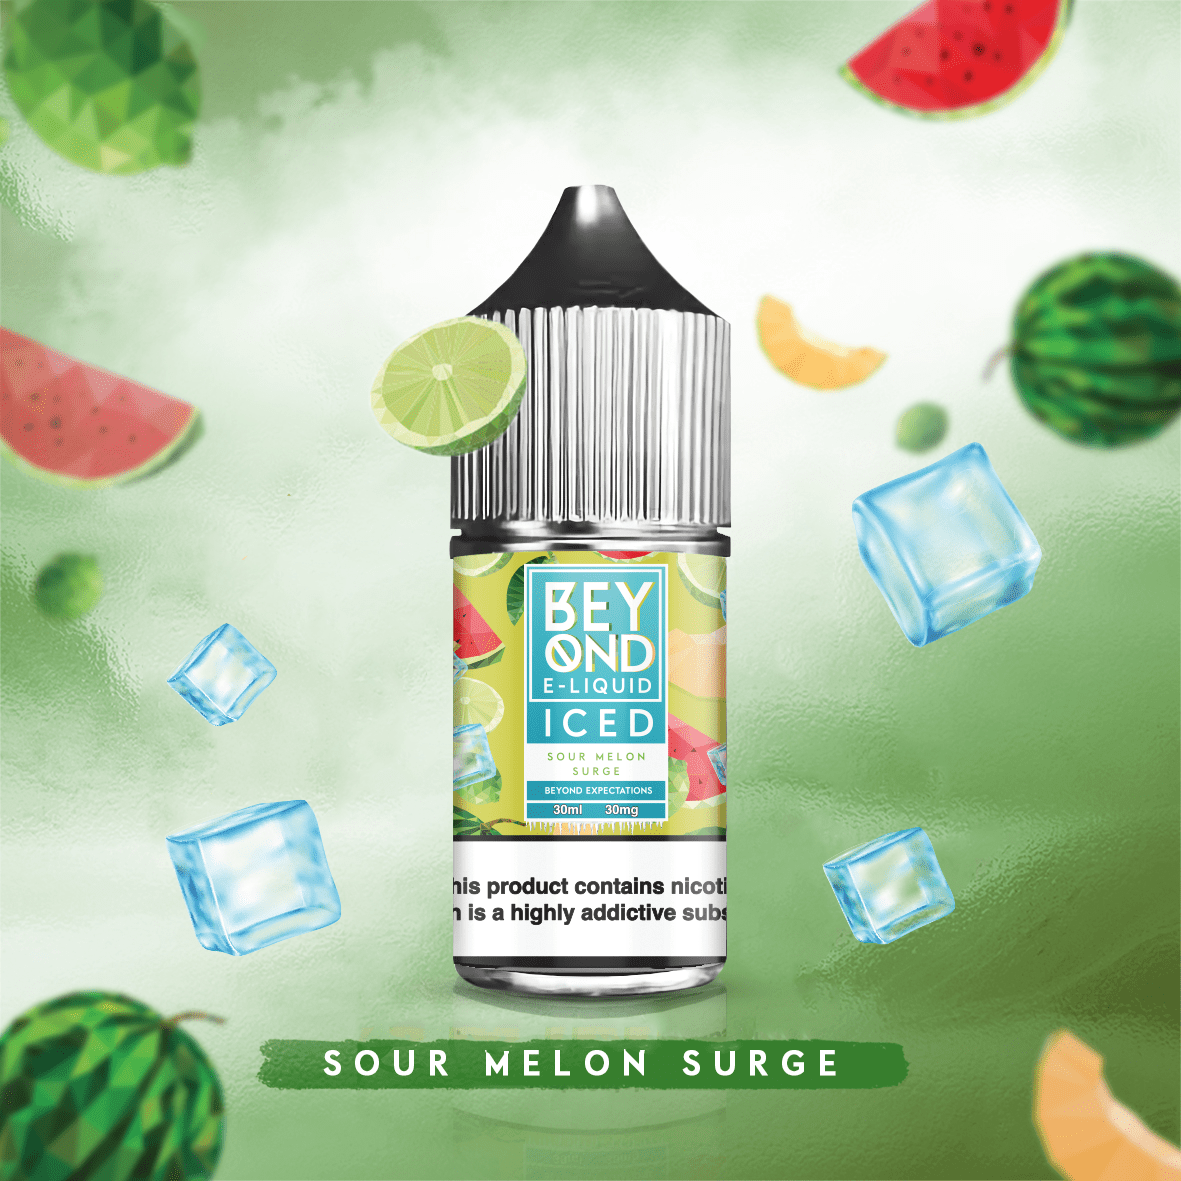 Buy Beyond Iced Sour Melon Surge By Ivg Salt At Best Price In Pakistan